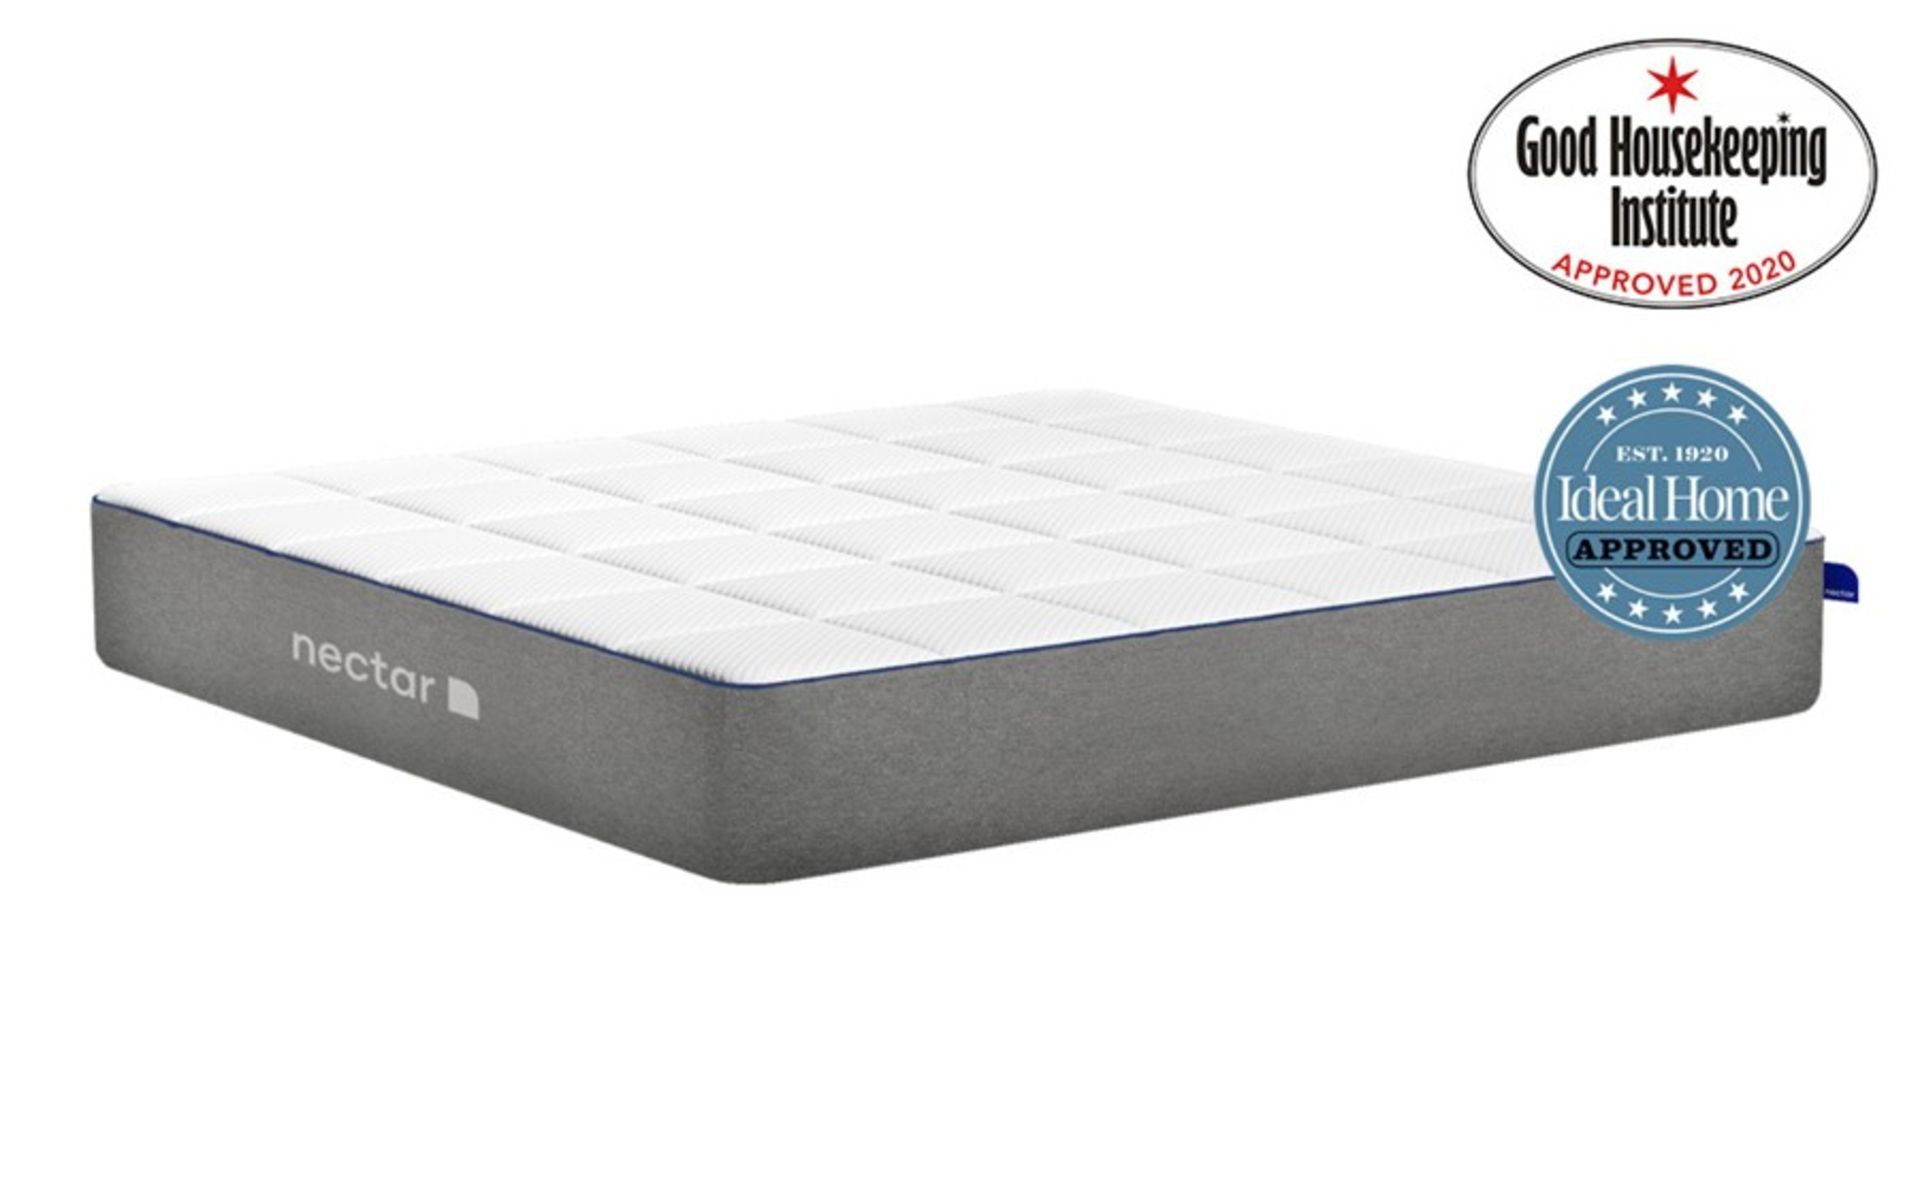 Nectar Professionally Refurbished Smart Pressure Relieving Super King size Memory Foam Mattress,